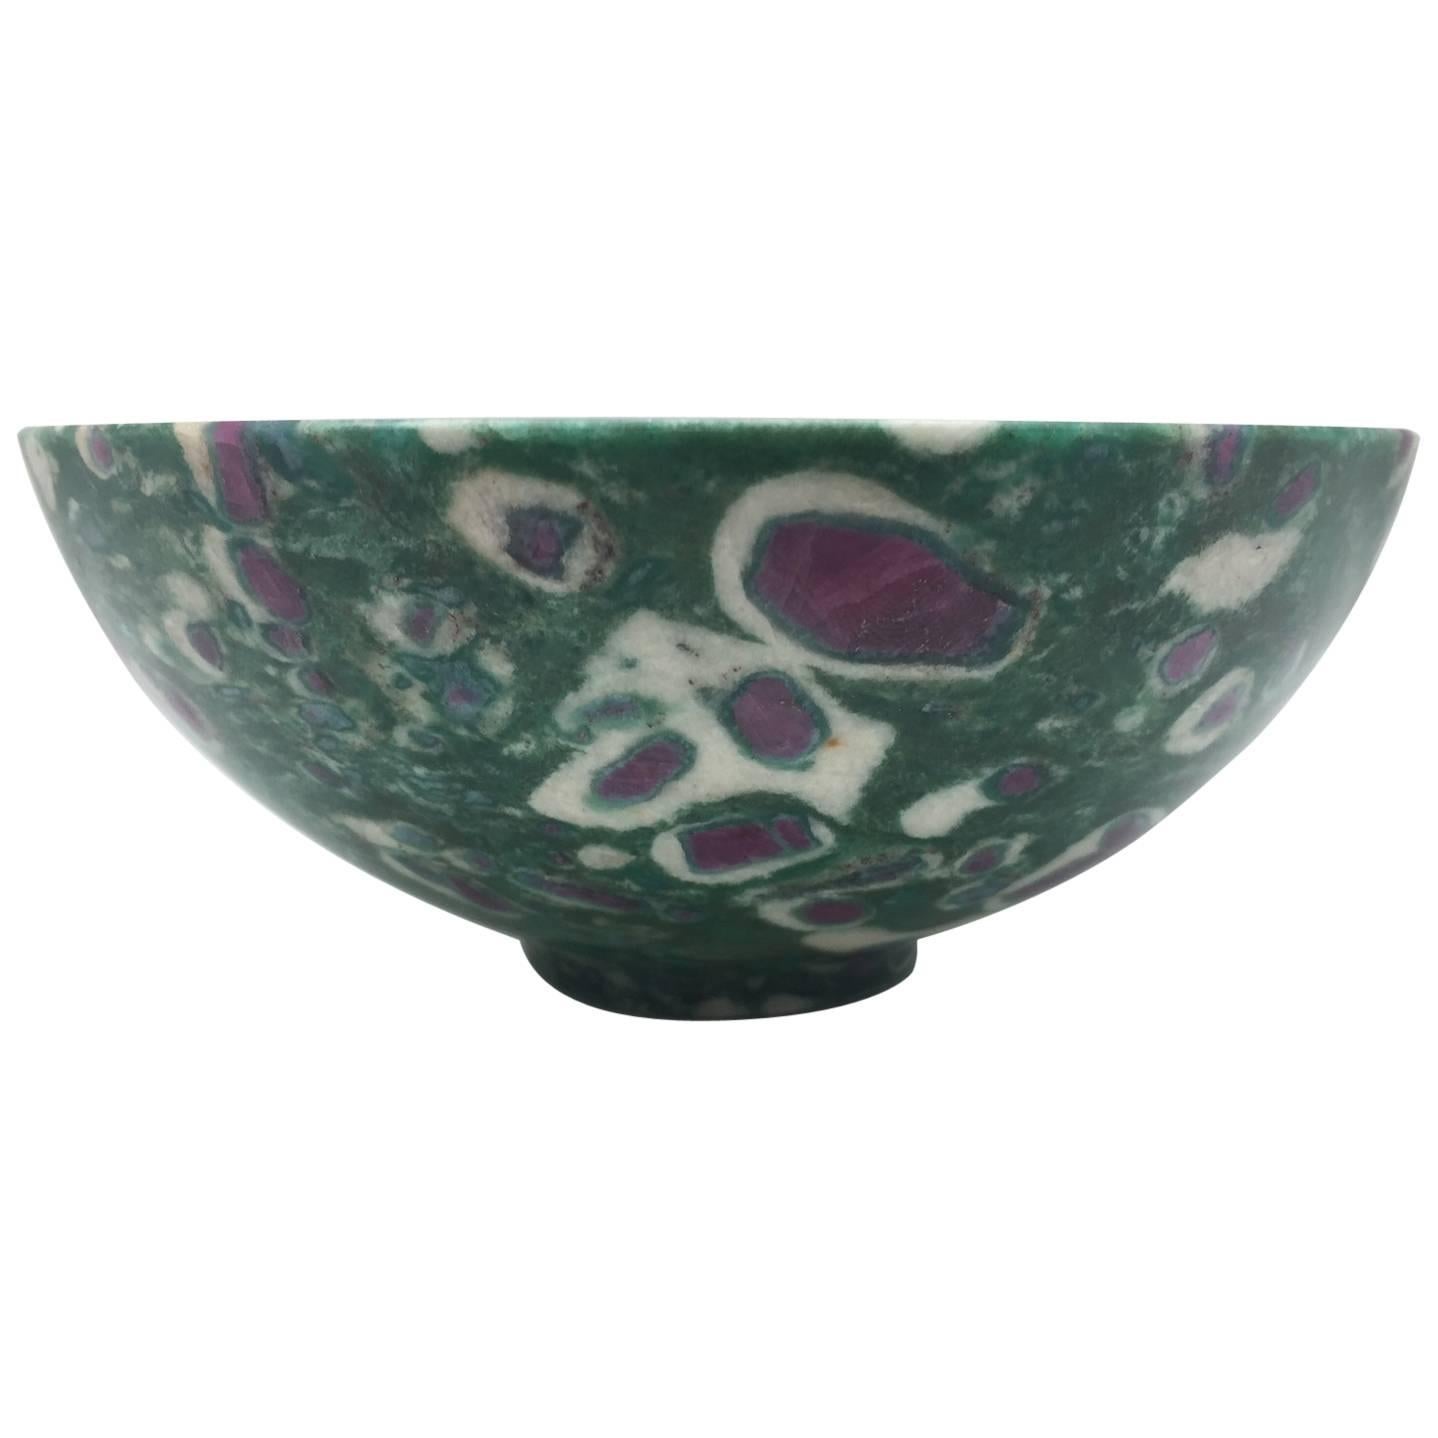 Red Ruby in Green Fuchsite Semi-Precious Footed Stone Bowl